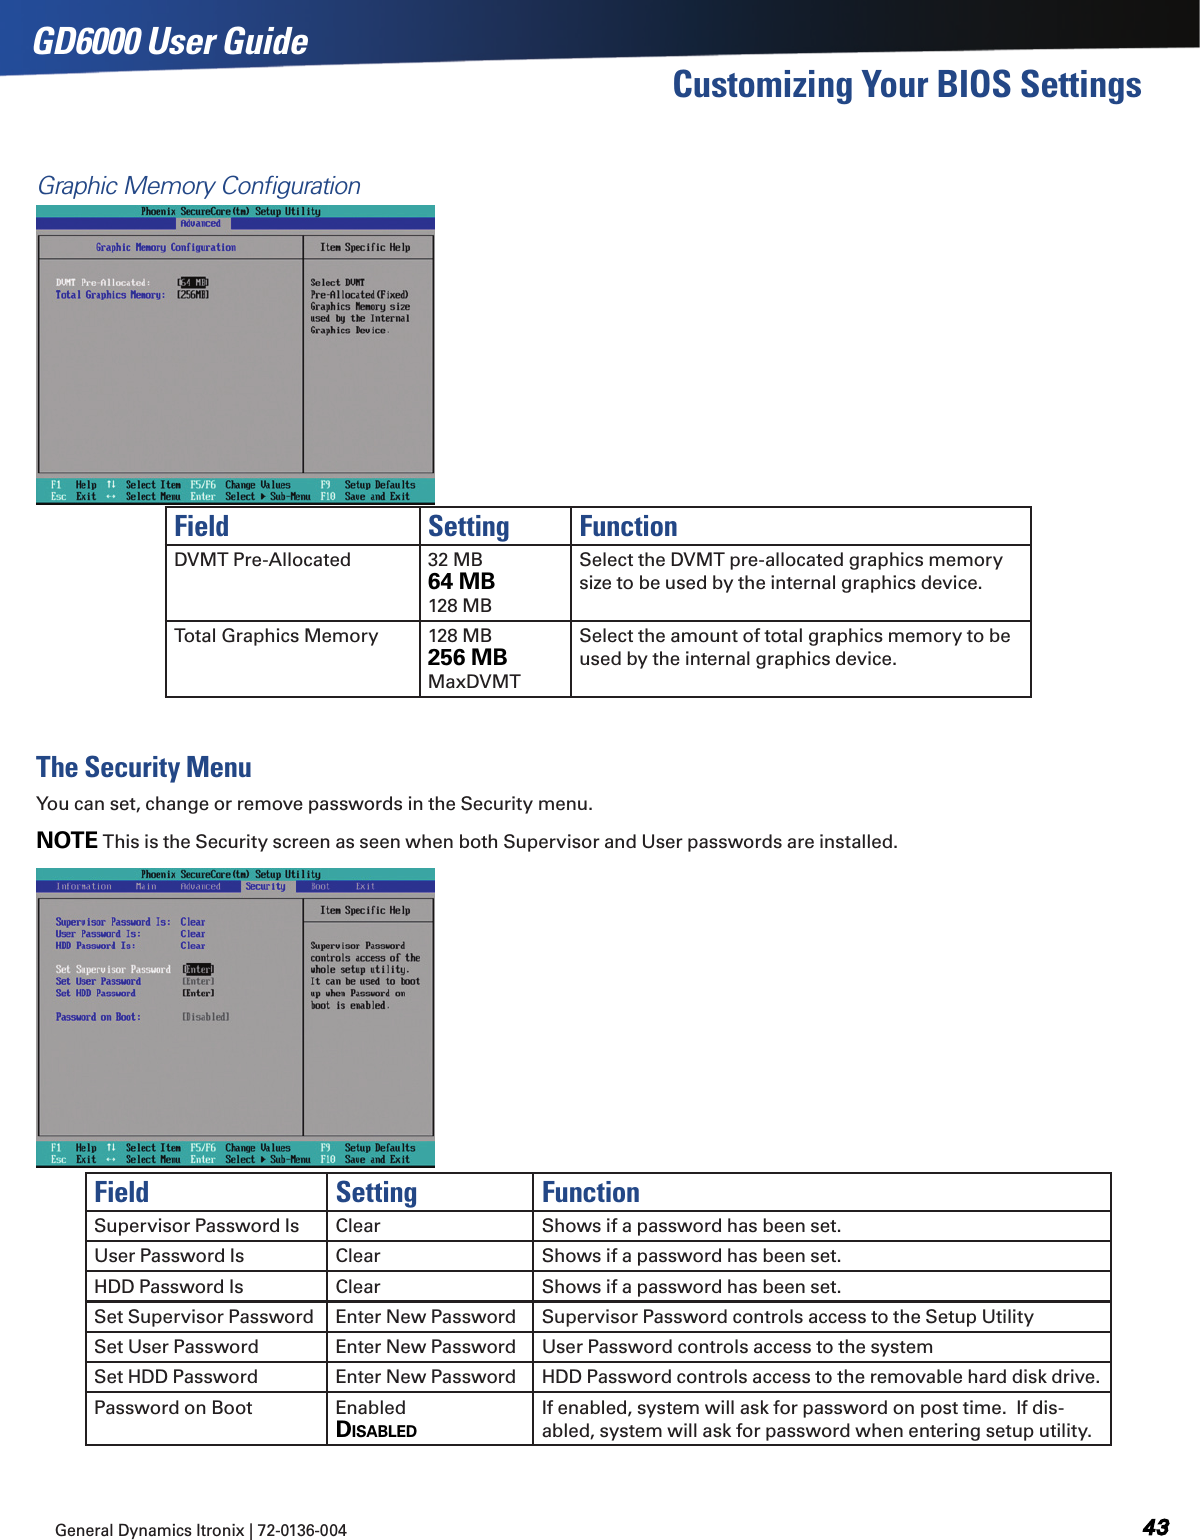 General Dynamics Itronix | 72-0136-004  GD6000 User GuideCustomizing Your BIOS SettingsGraphic Memory ConﬁgurationField Setting FunctionDVMT Pre-Allocated 32 MB 64 mB 128 MBSelect the DVMT pre-allocated graphics memory size to be used by the internal graphics device.Total Graphics Memory 128 MB 256 mB MaxDVMTSelect the amount of total graphics memory to be used by the internal graphics device.The Security MenuYou can set, change or remove passwords in the Security menu.note This is the Security screen as seen when both Supervisor and User passwords are installed.Field Setting FunctionSupervisor Password Is Clear Shows if a password has been set.User Password Is Clear Shows if a password has been set.HDD Password Is Clear Shows if a password has been set.Set Supervisor Password Enter New Password Supervisor Password controls access to the Setup UtilitySet User Password Enter New Password User Password controls access to the systemSet HDD Password Enter New Password HDD Password controls access to the removable hard disk drive.Password on Boot Enabled disaBledIf enabled, system will ask for password on post time.  If dis-abled, system will ask for password when entering setup utility. 